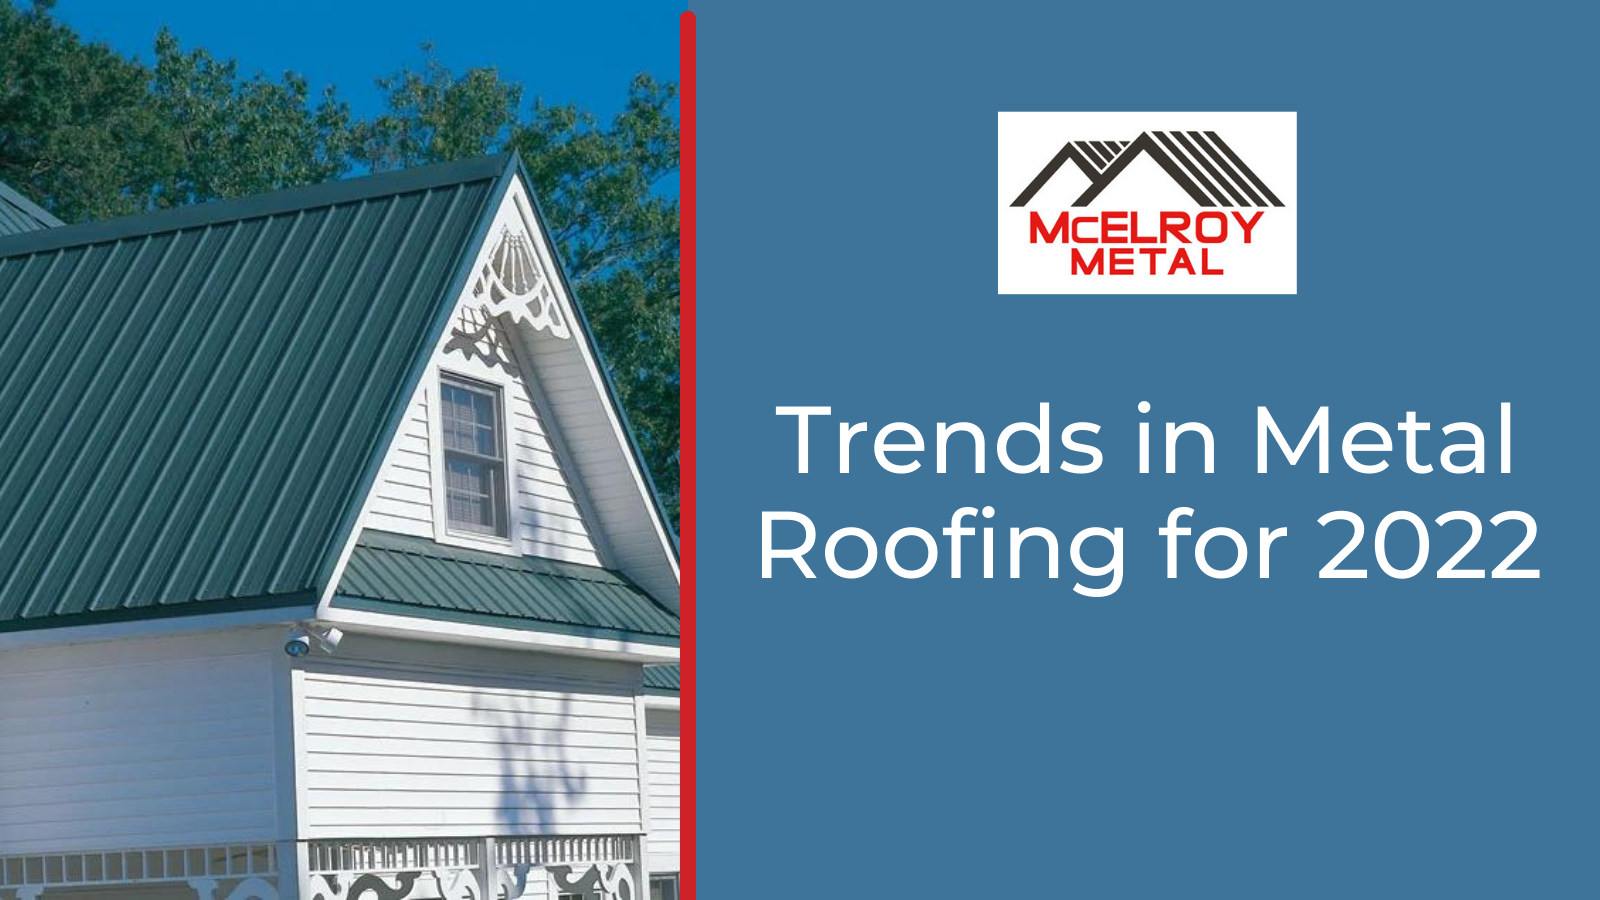 Trends in Metal Roofing for 2022